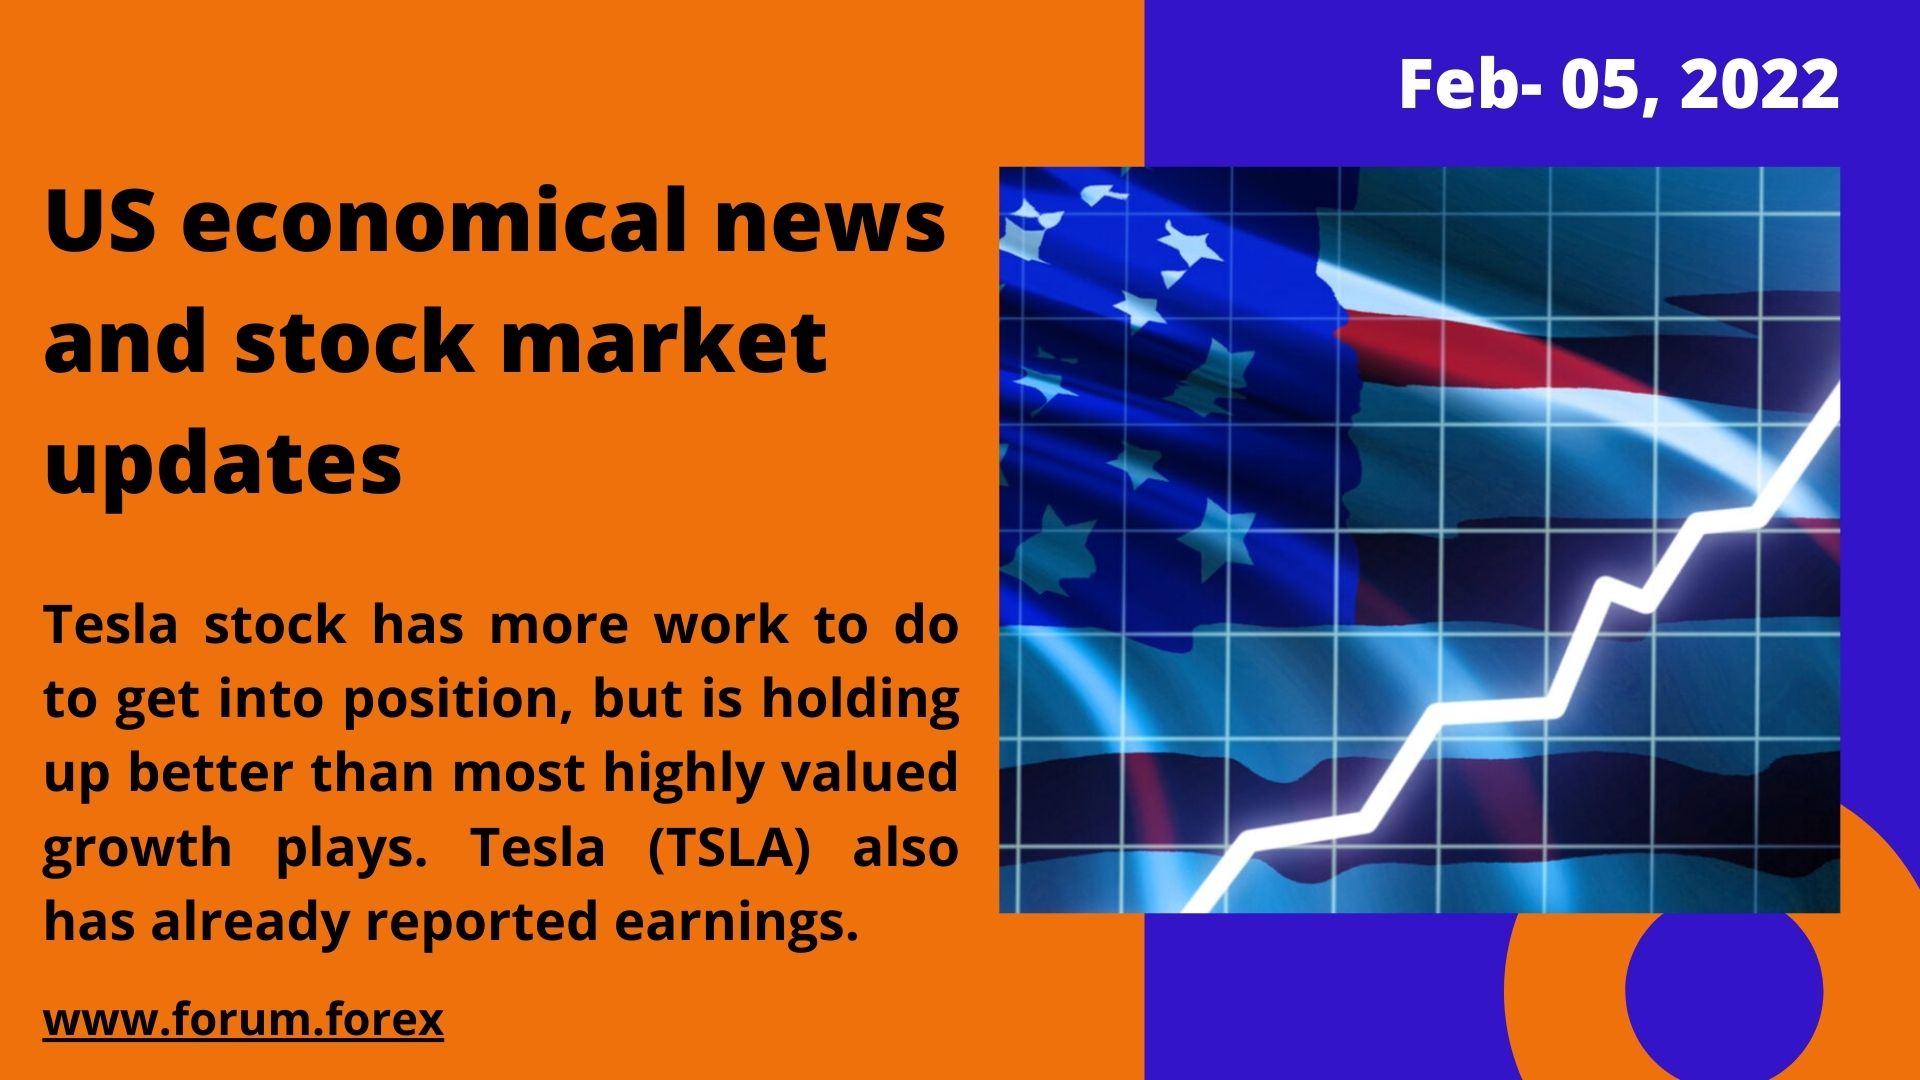 US economical news and updates